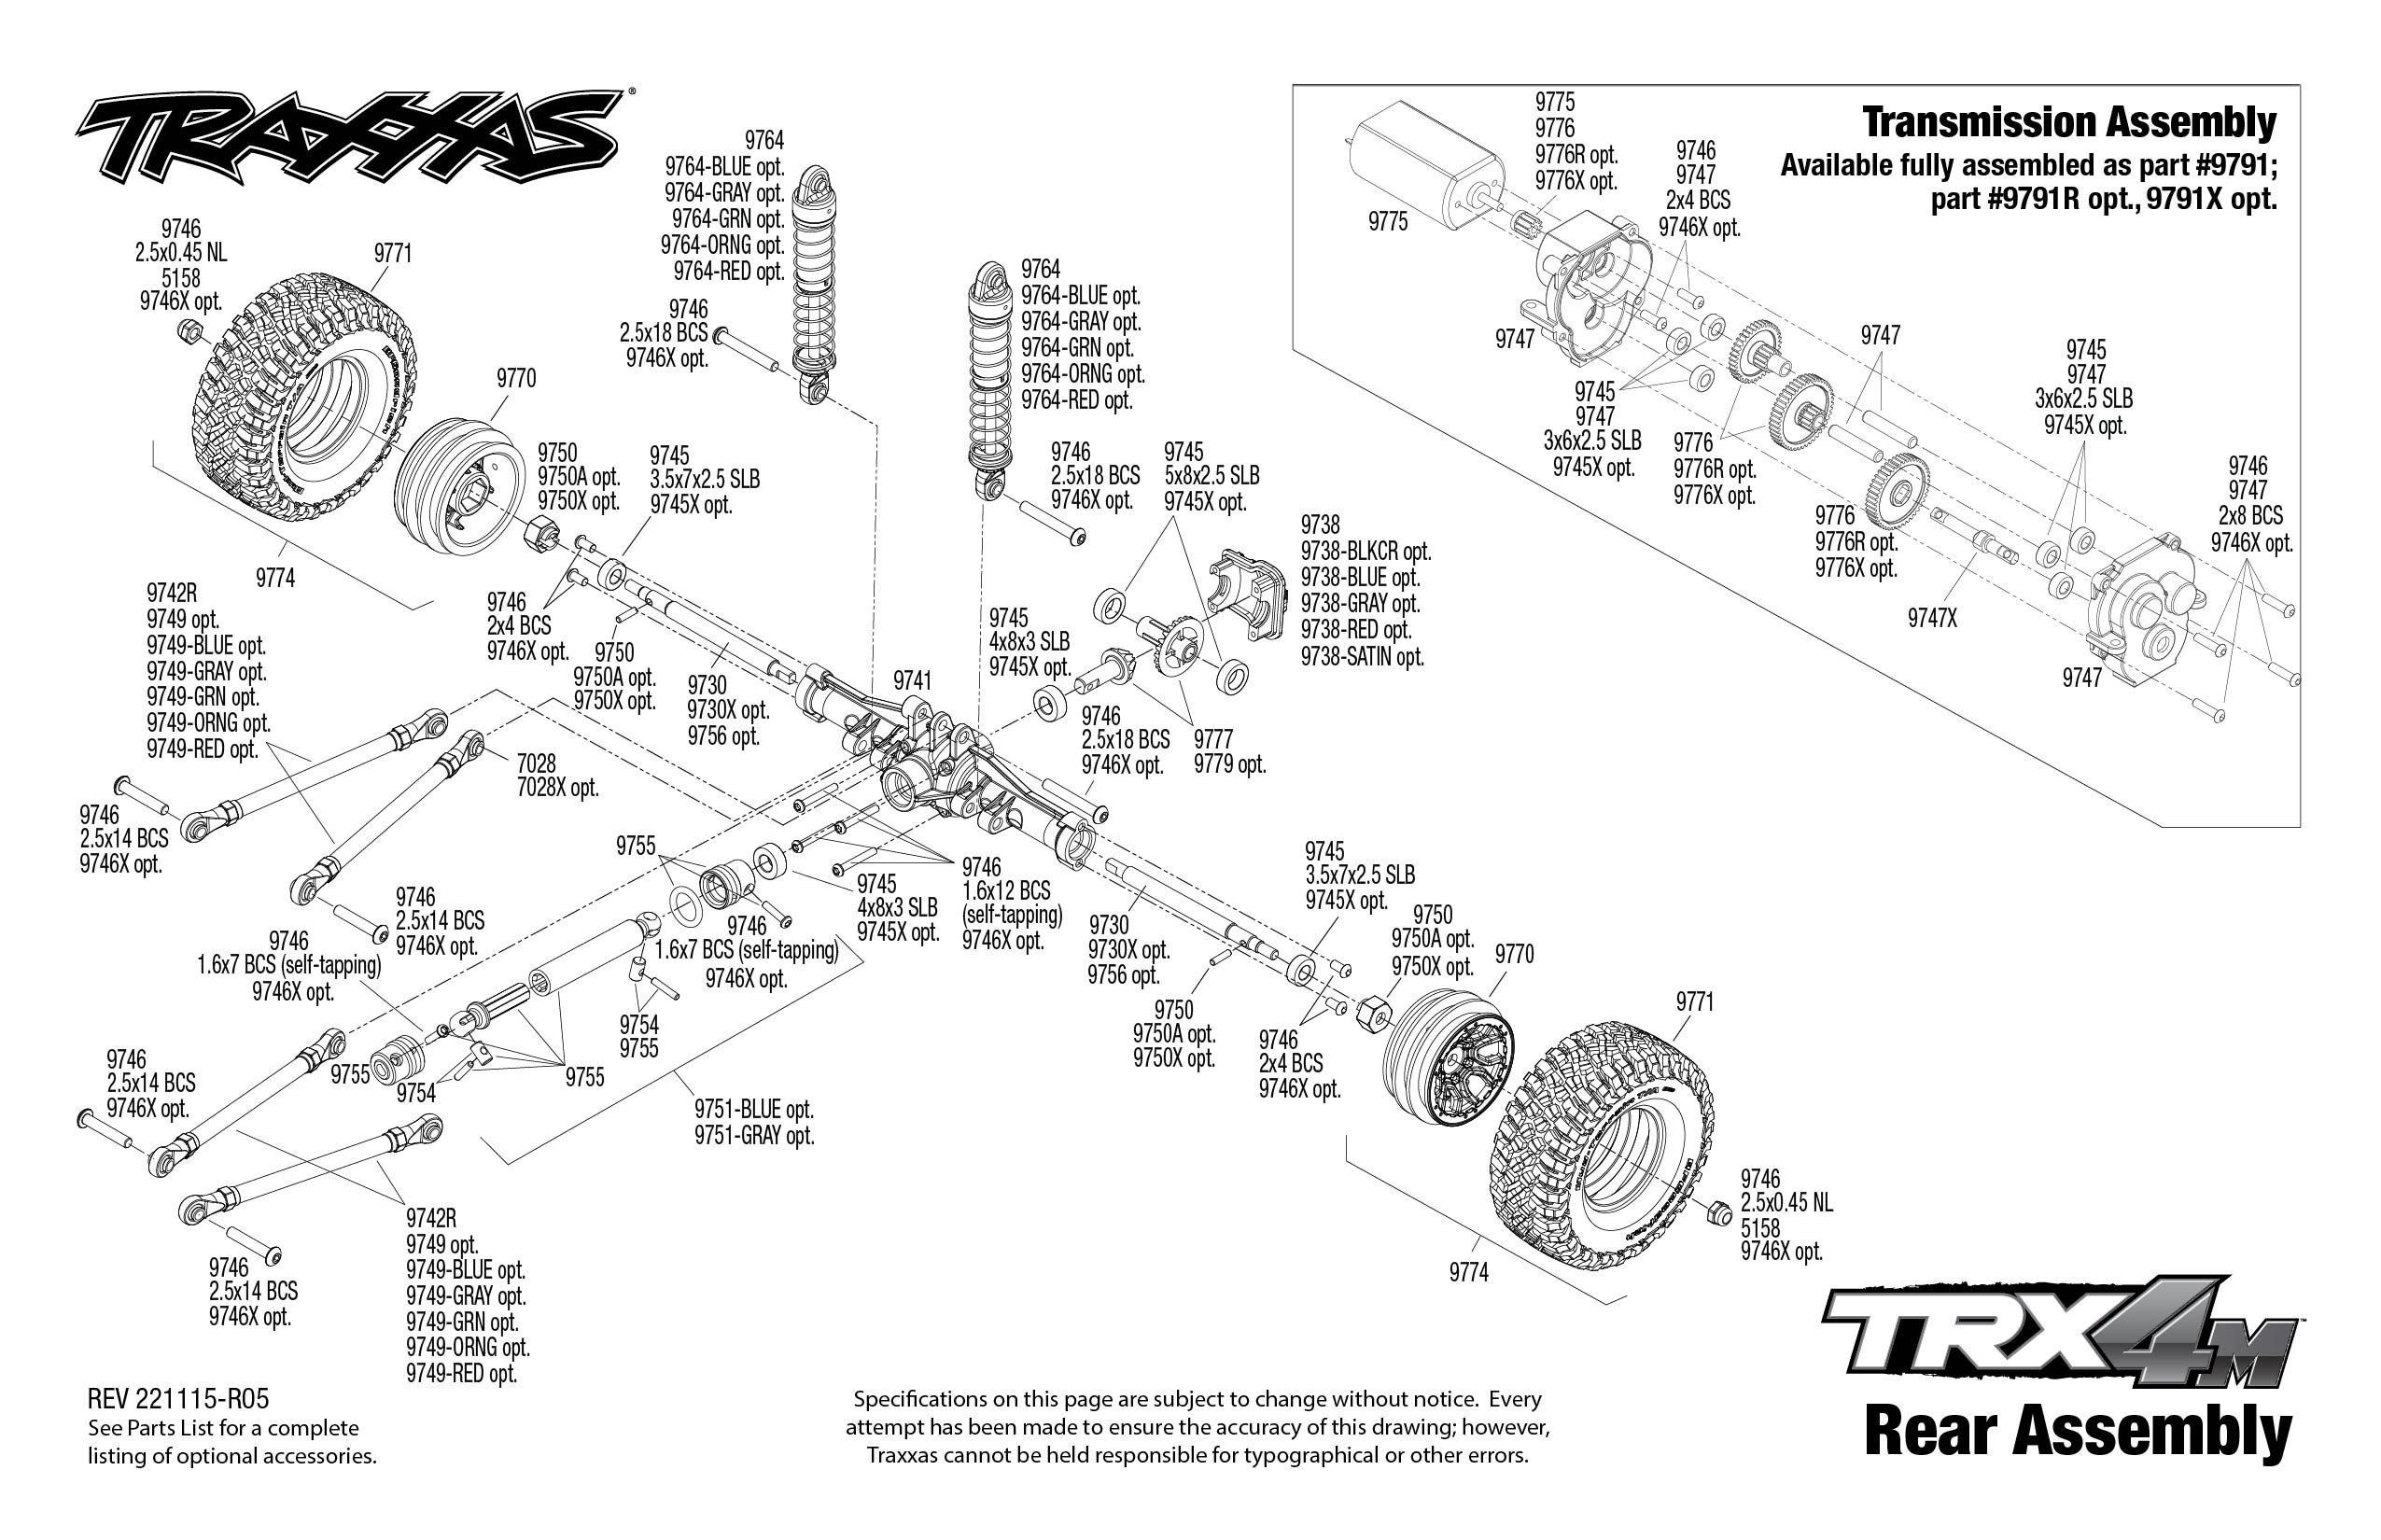 Rear Assembly Exploded View